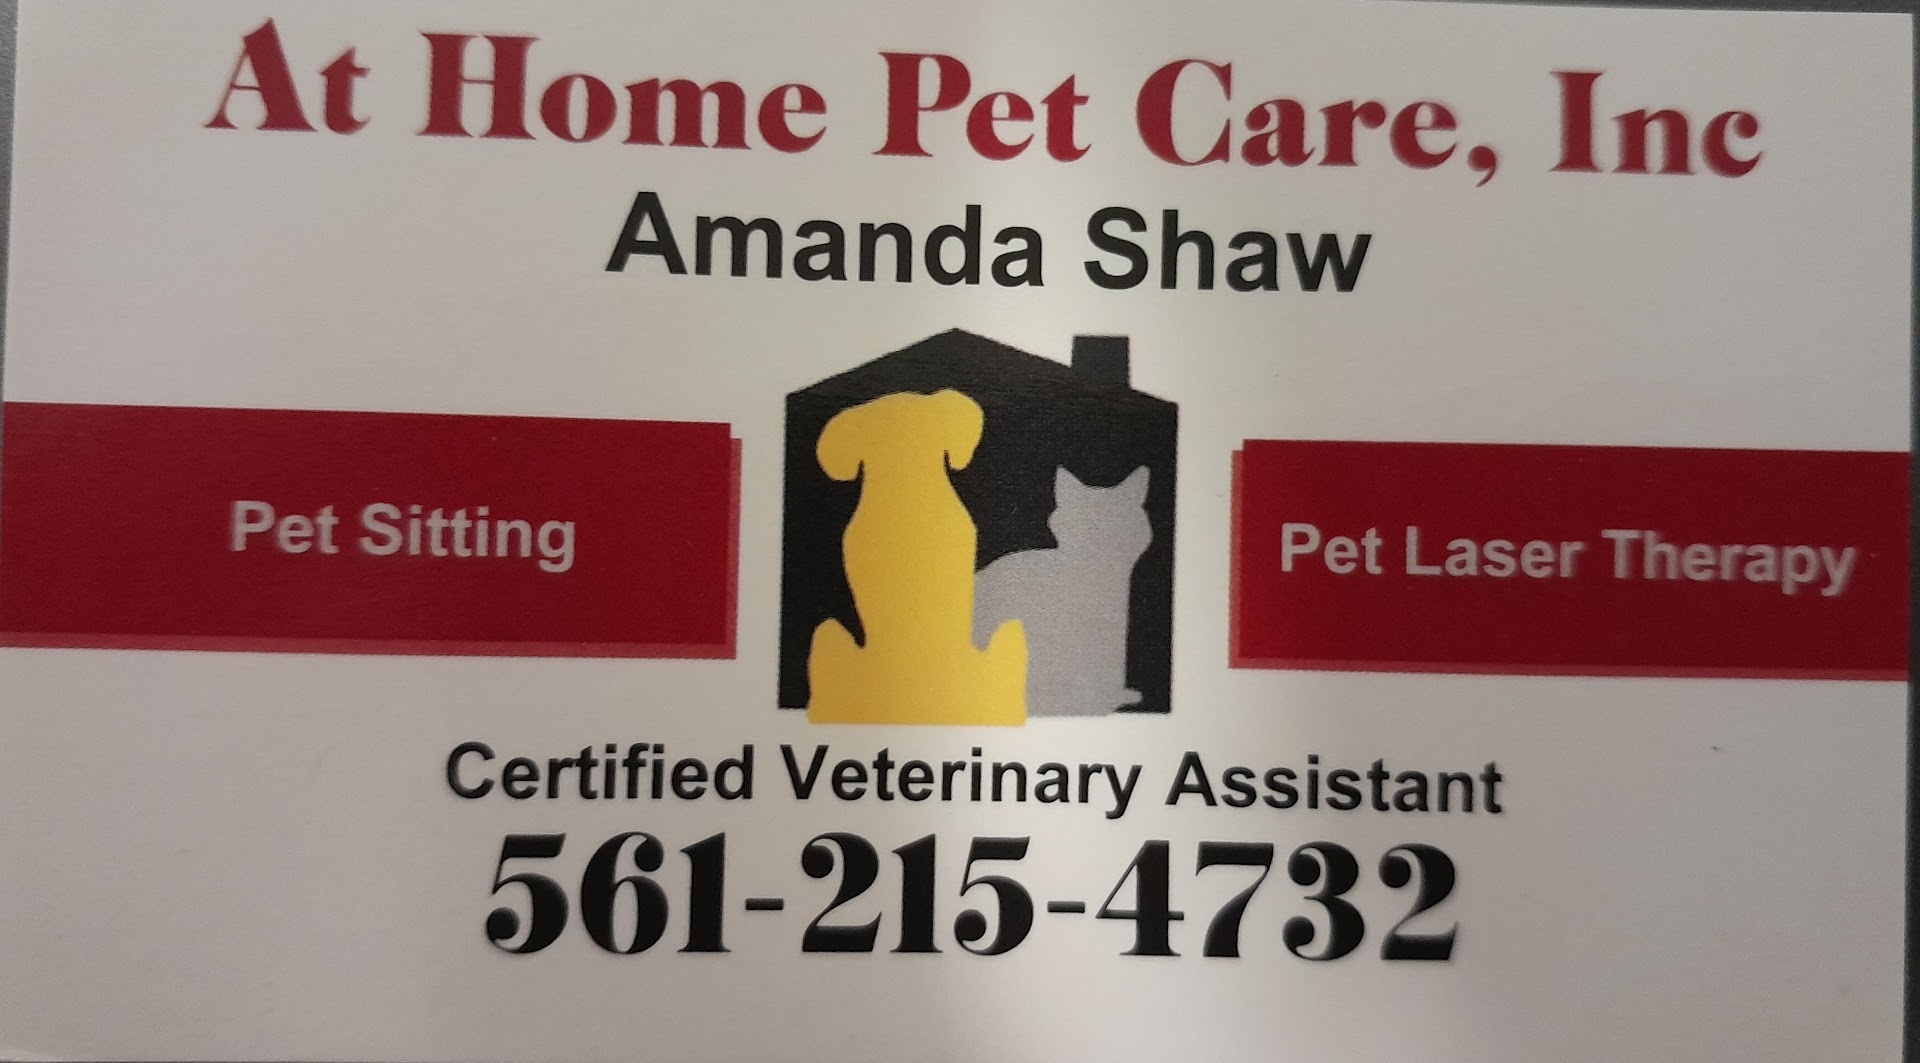 AT HOME PET CARE, INC.